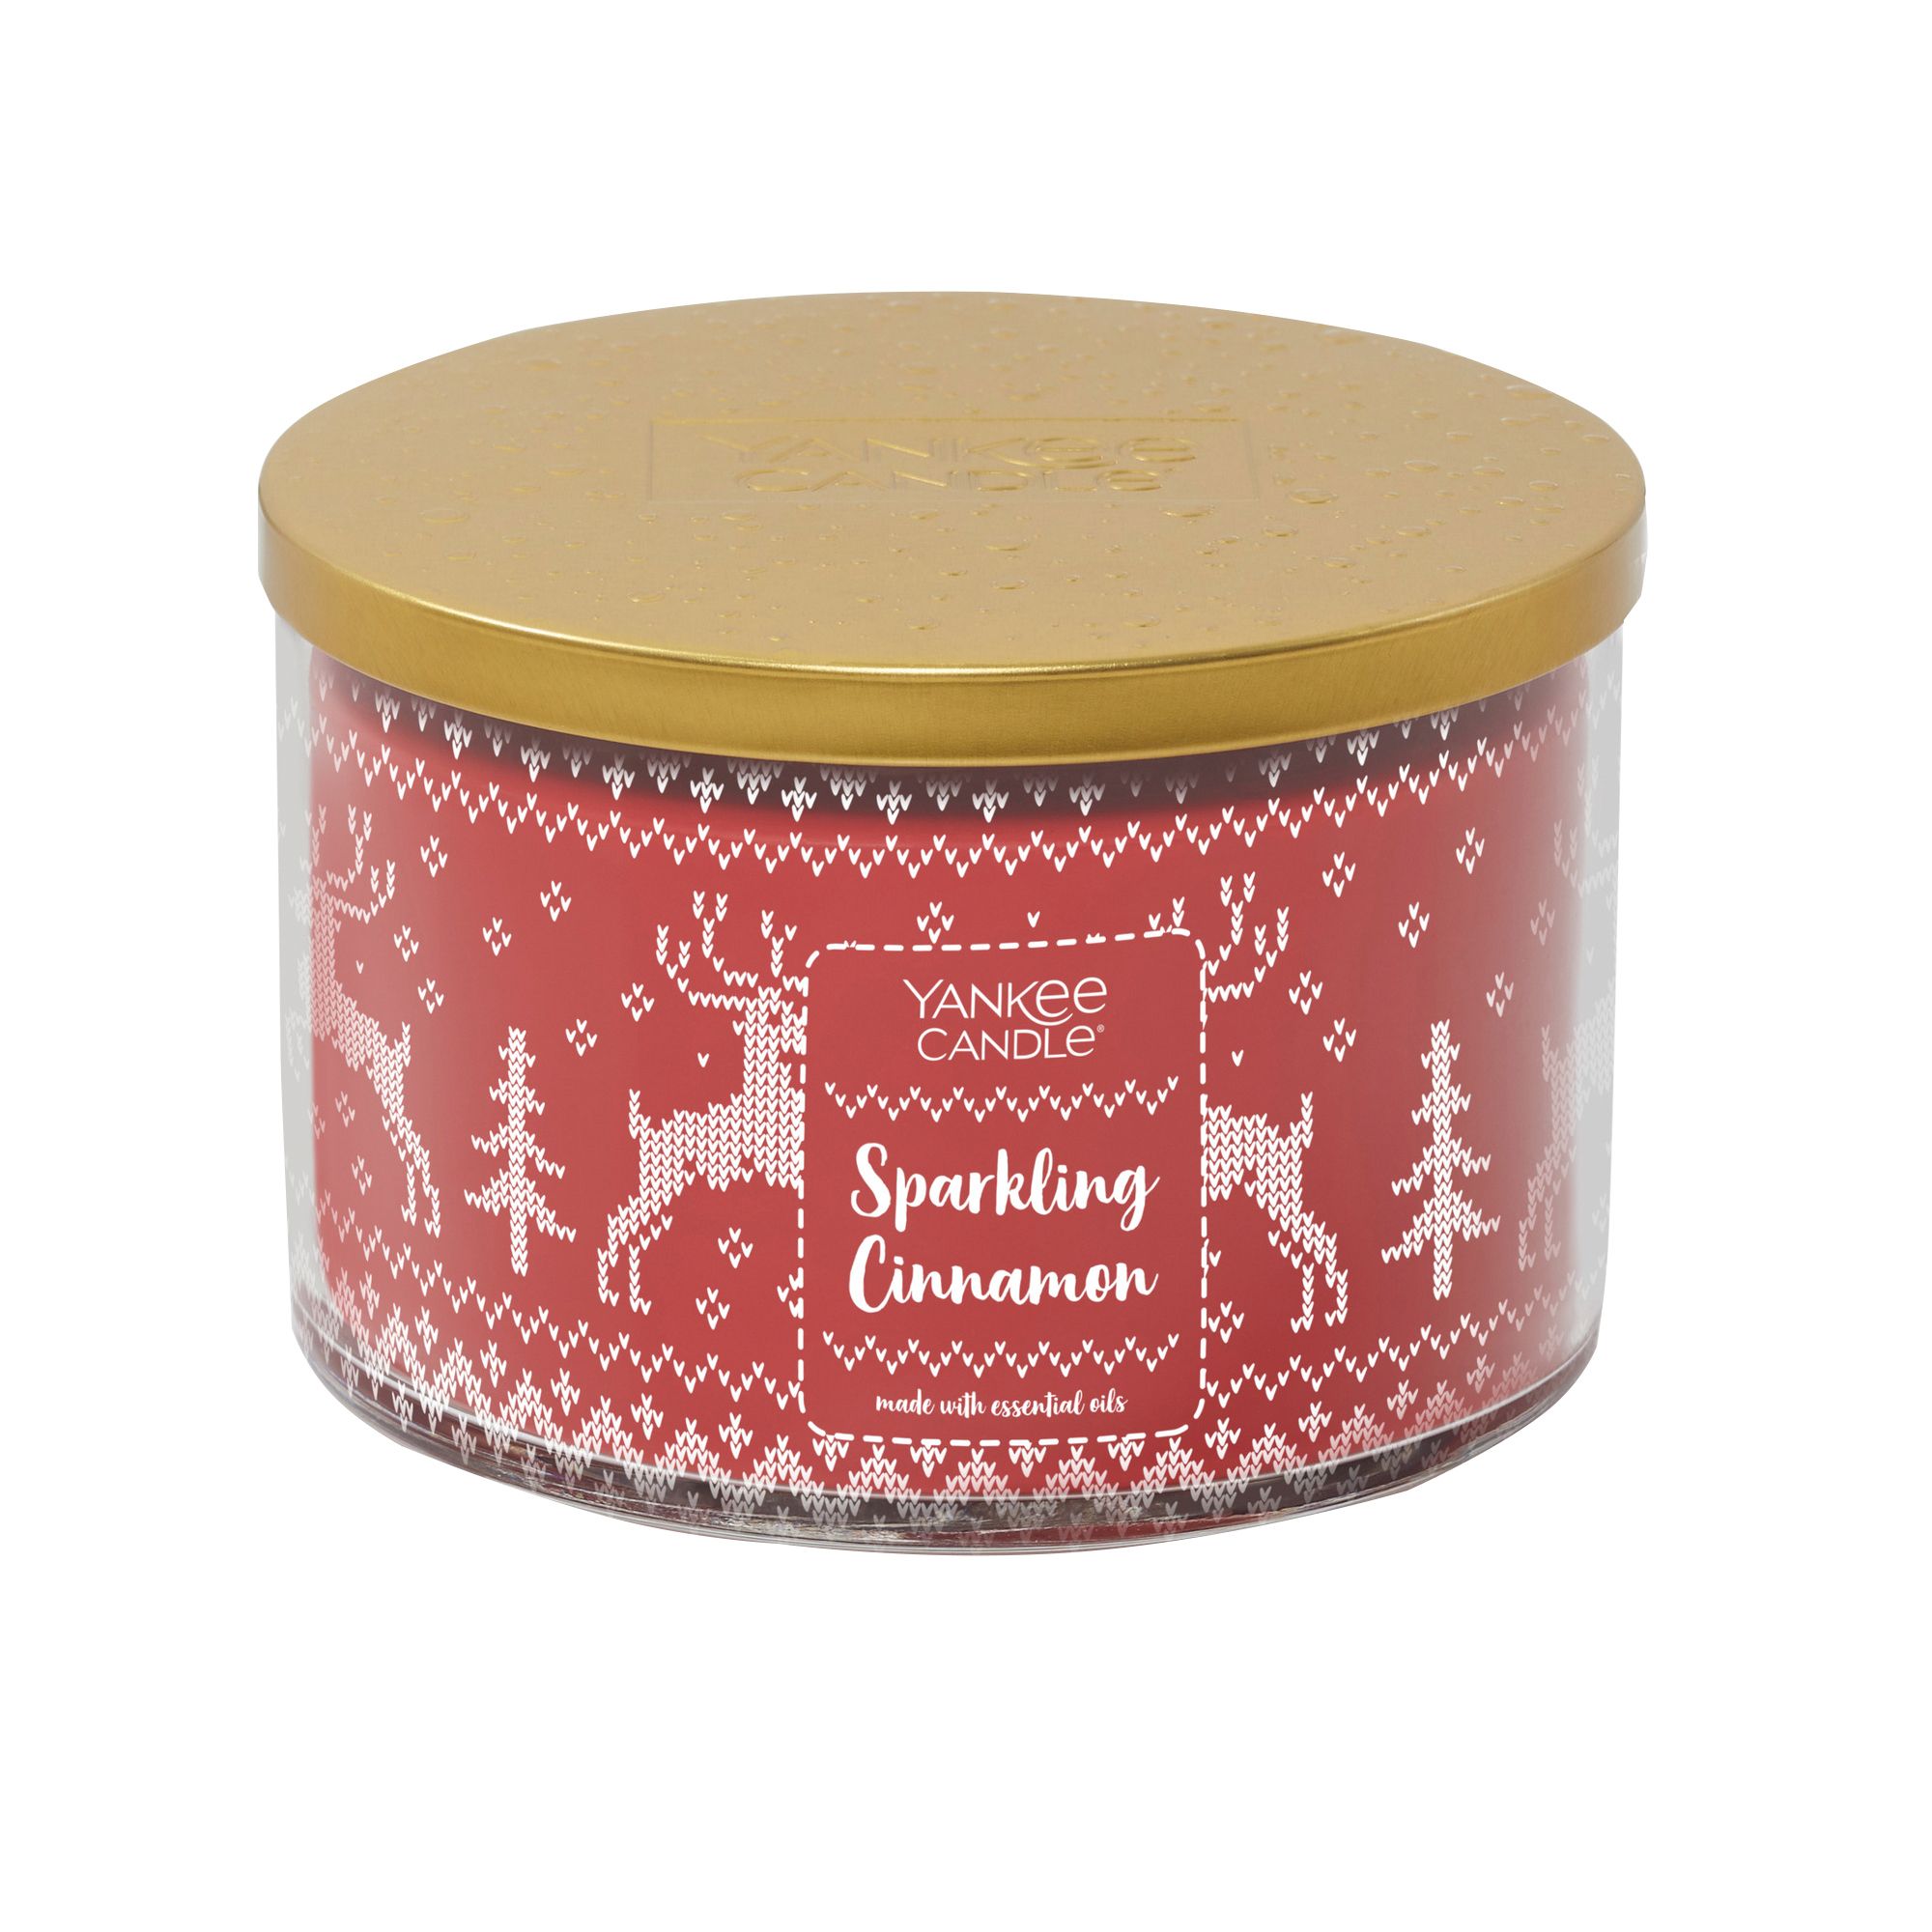 Yankee Candle 3-Wick Candle - Sparkling Cinnamon